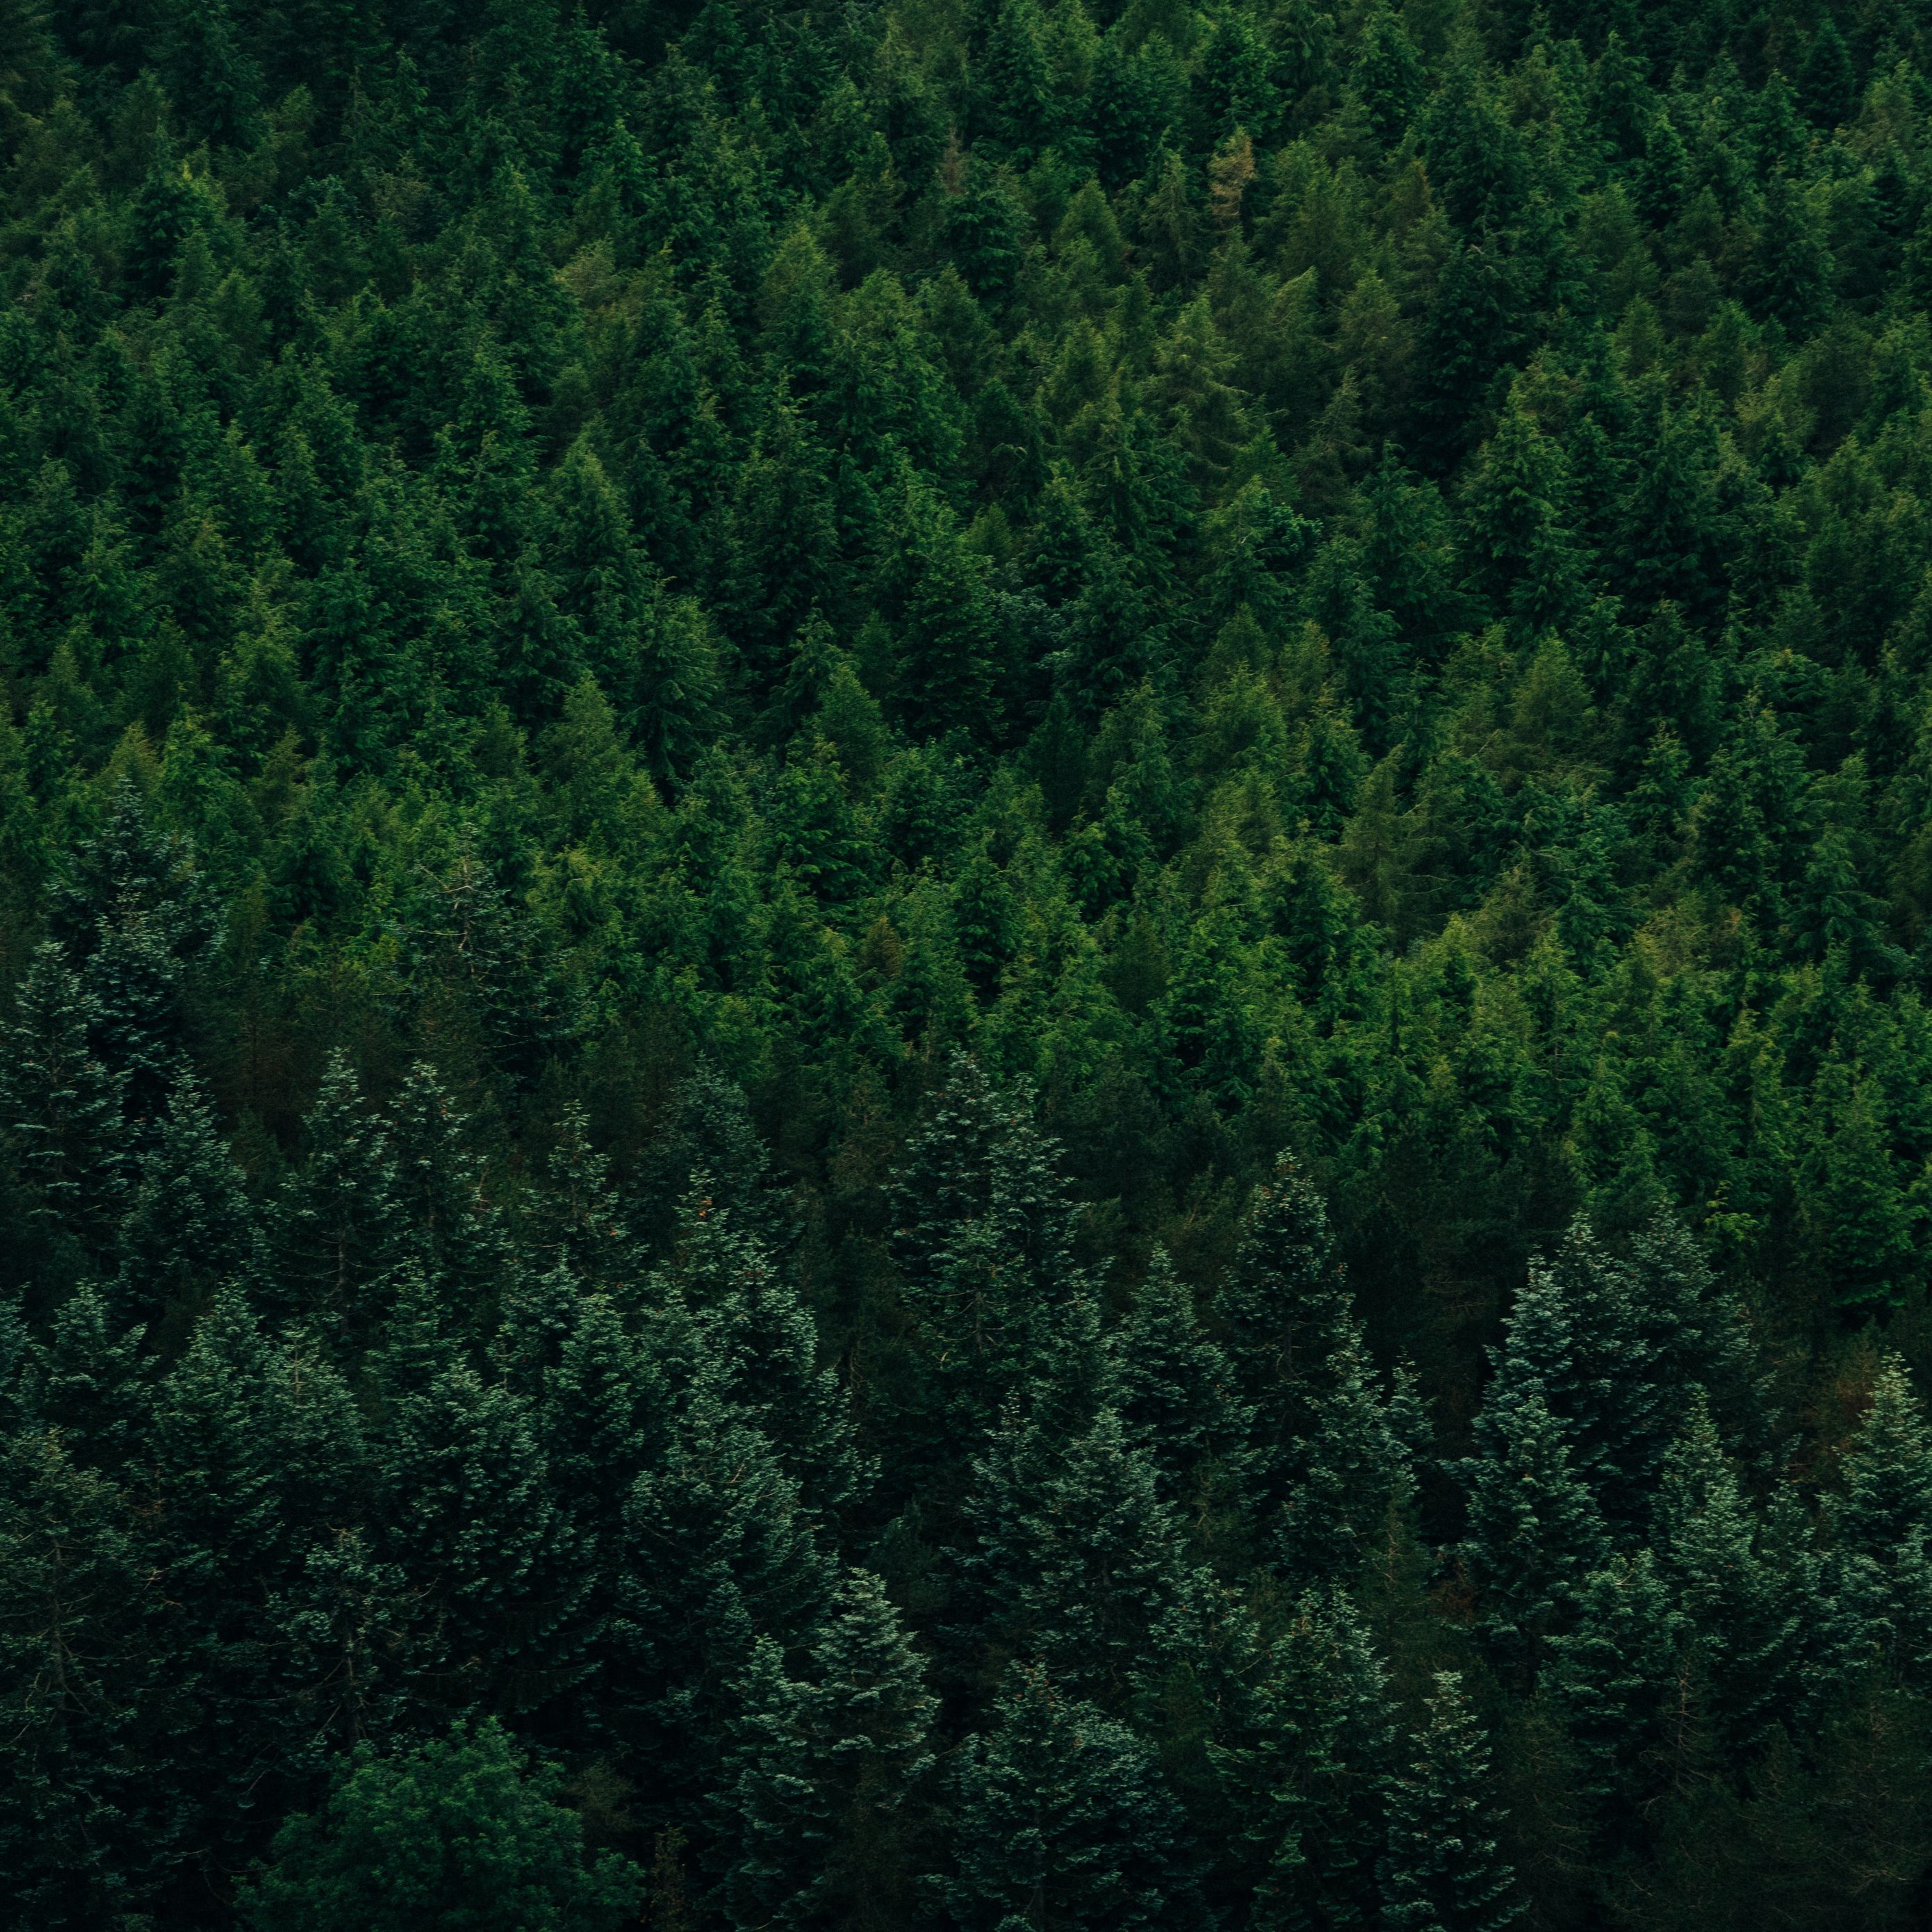 Download wallpaper 2780x2780 forest, aerial view, trees, conifer ipad ...